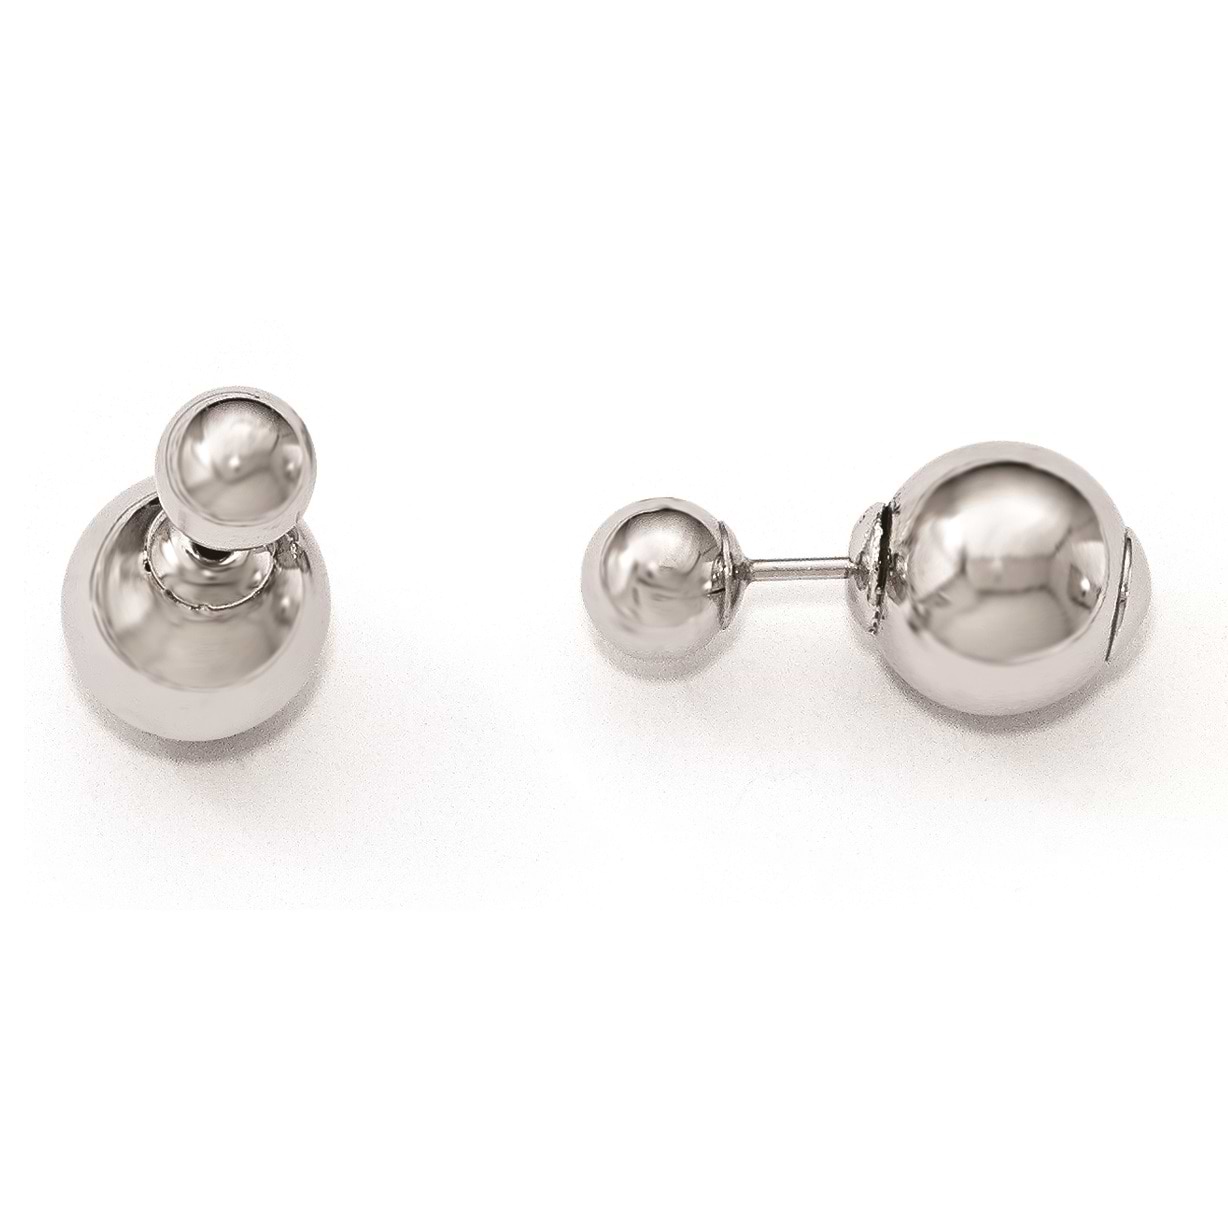 Polished Front-Back Ball Style Fine Stud Earrings 14k White Gold